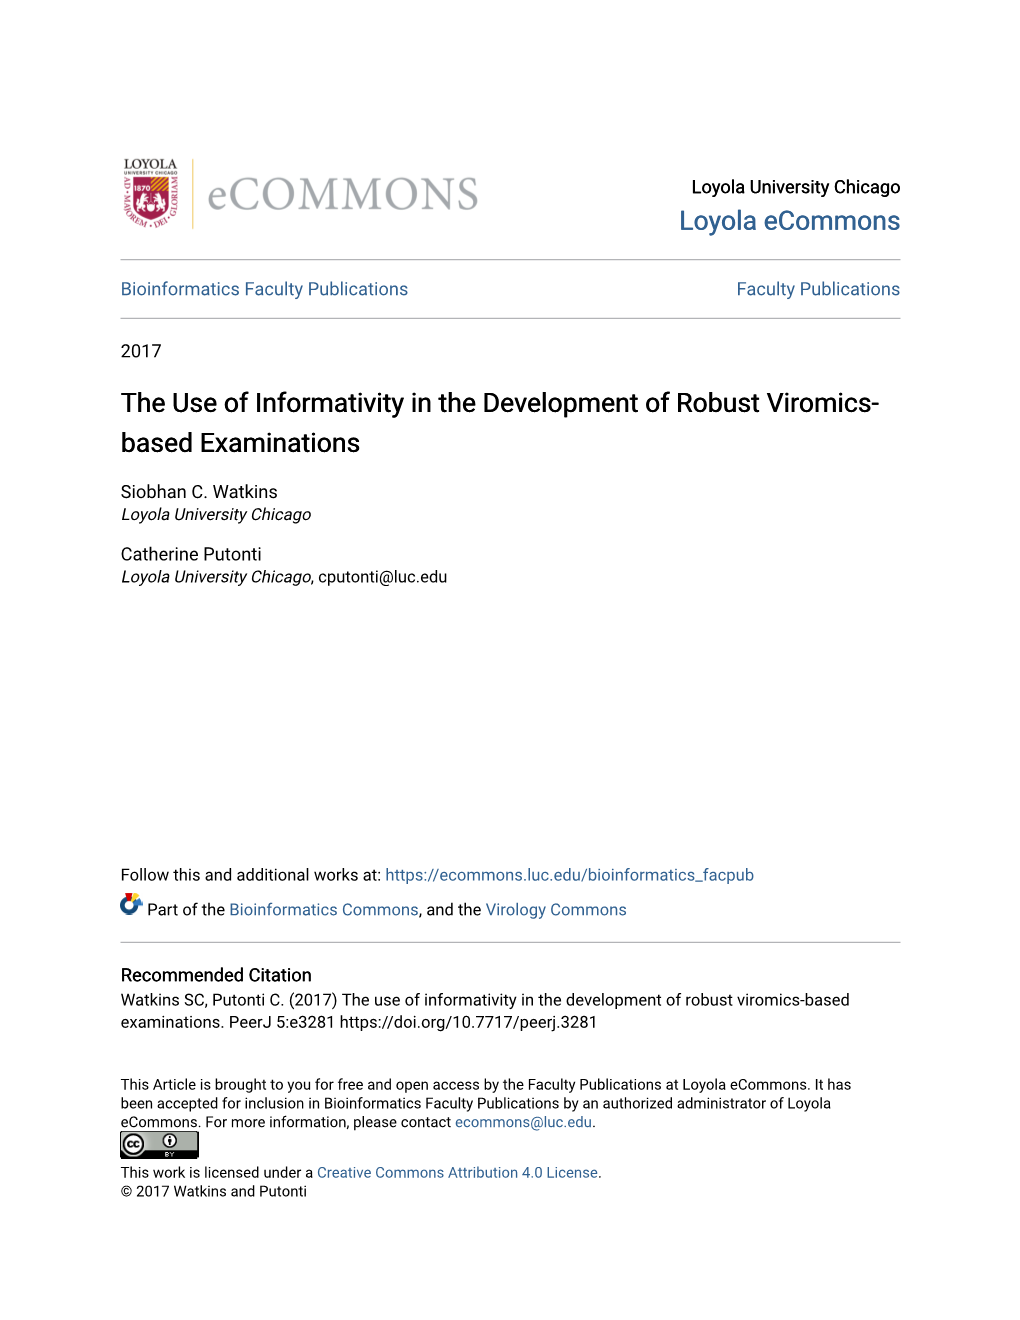 The Use of Informativity in the Development of Robust Viromics-Based Examinations